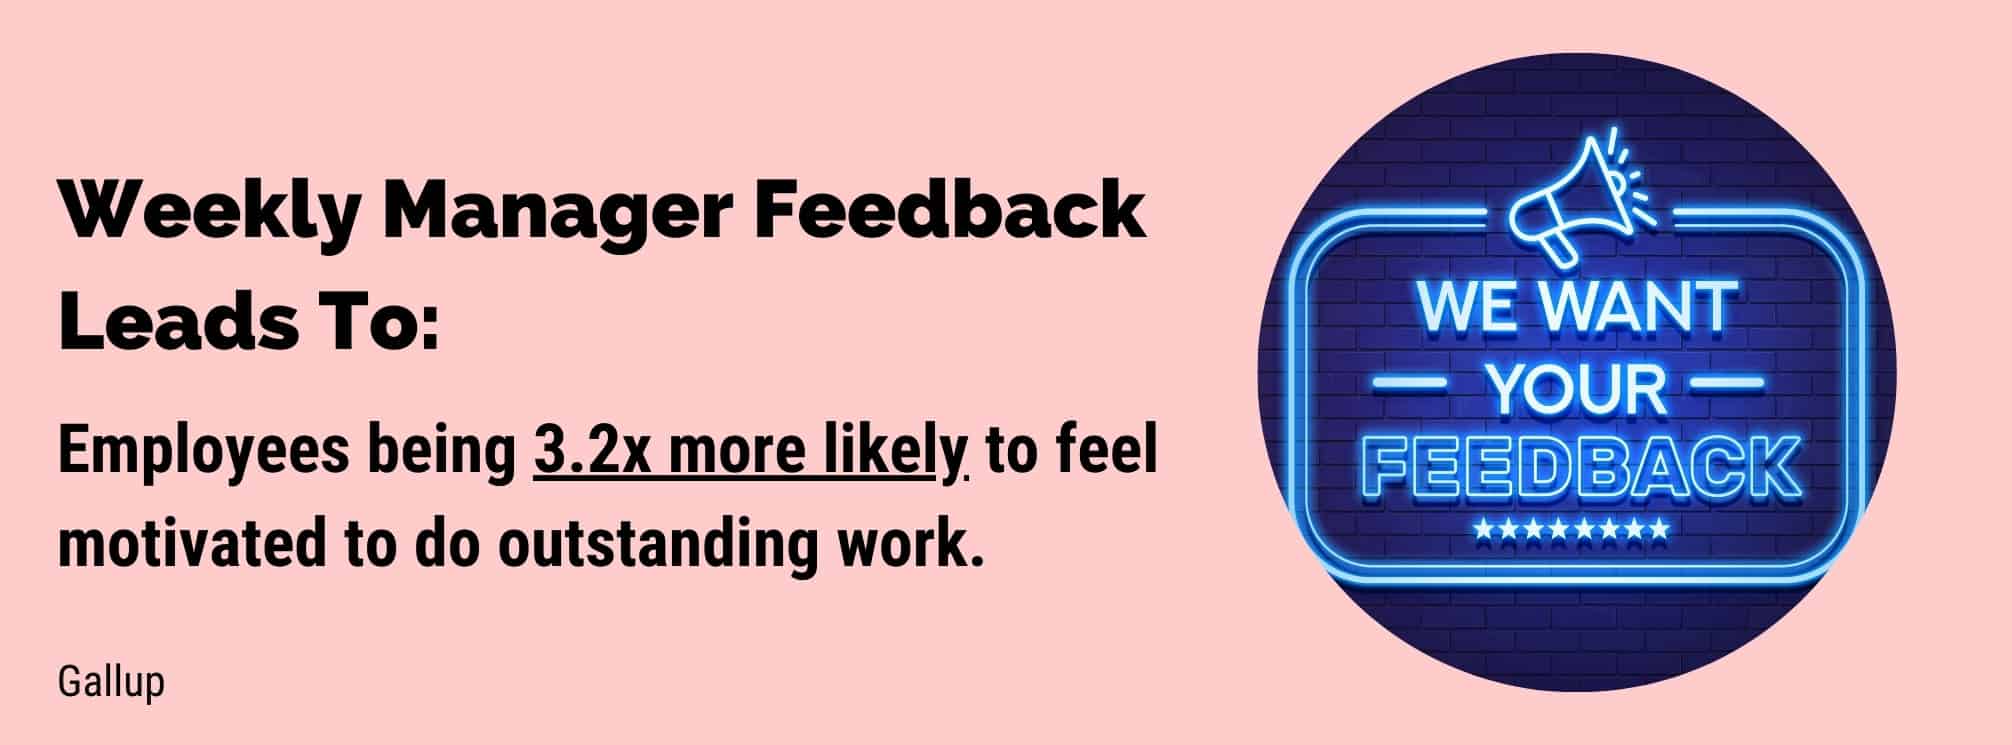 Gallup statistic: weekly manager feedback leads to employees being 3.2 times more likely to feel motivated to do outstanding work.